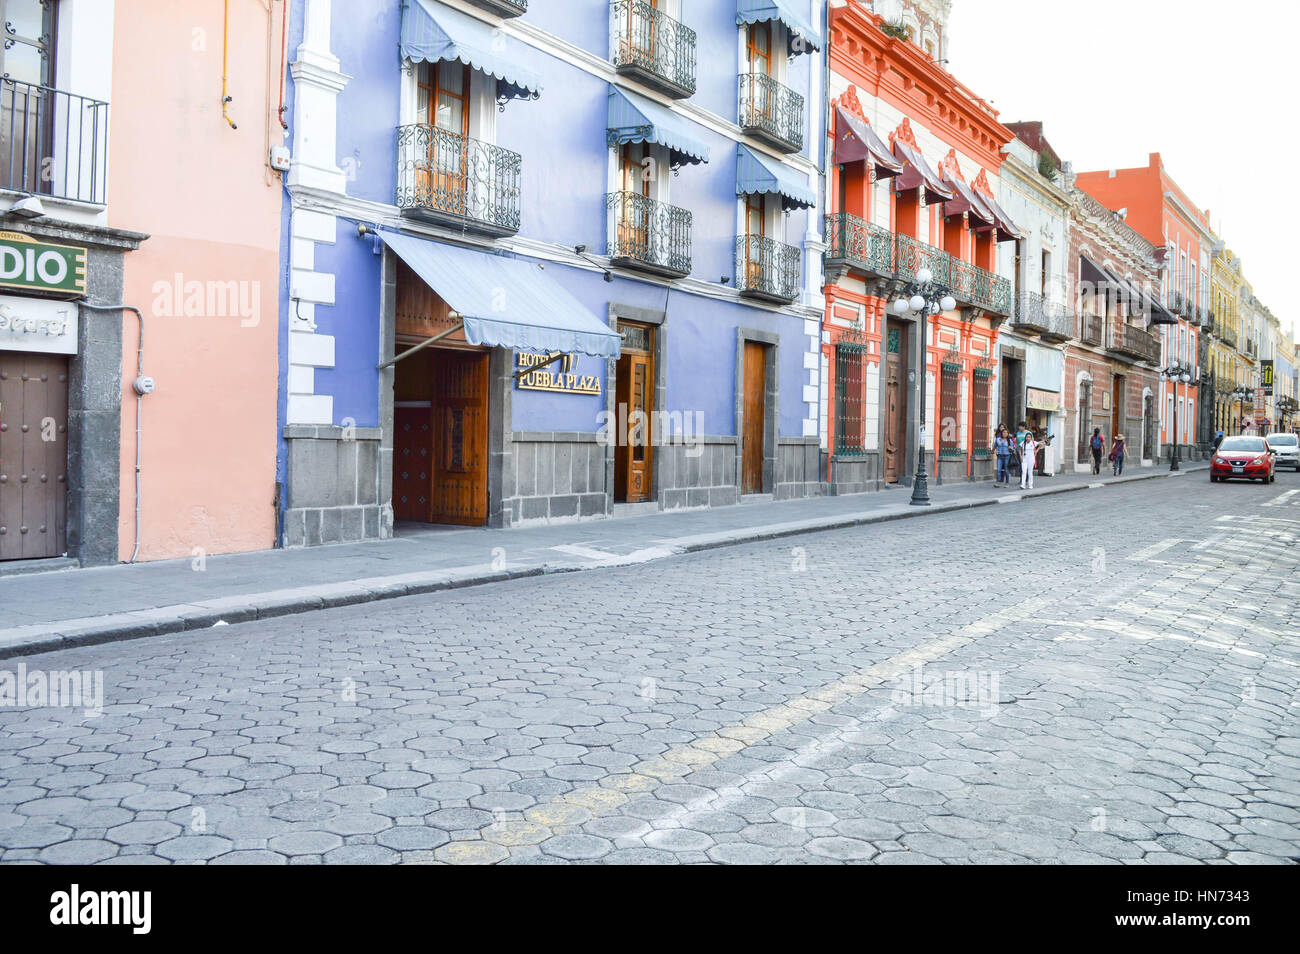 Puebla, Mexico - November 7, 2014: People stroll the streets of the beautiful colonial city of Puebla in Mexico Stock Photo